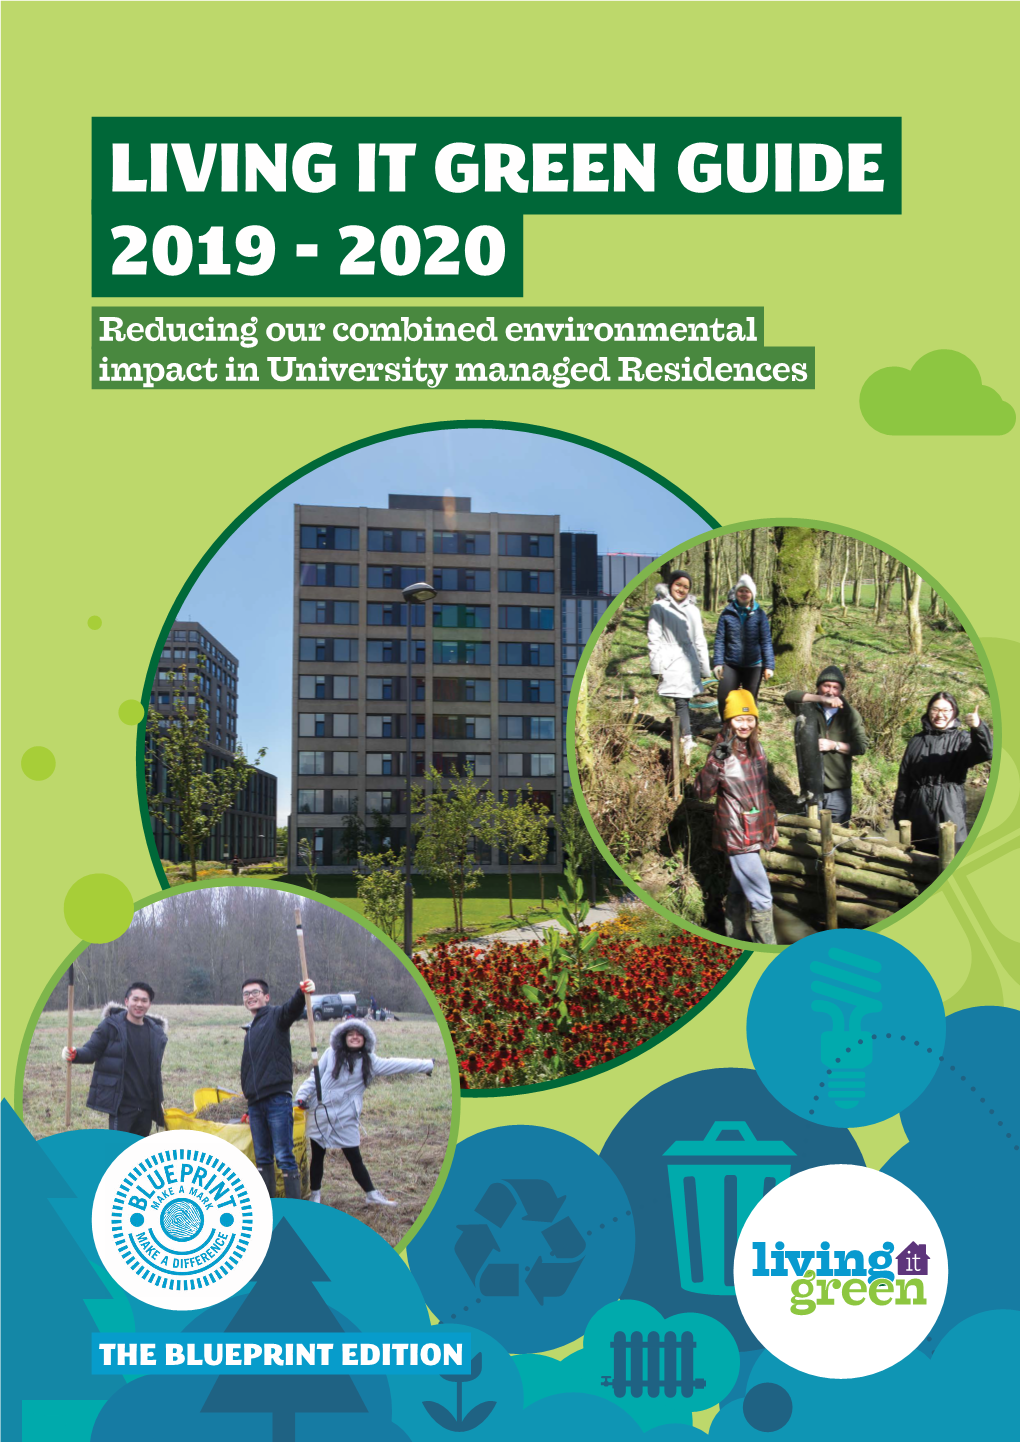 LIVING IT GREEN GUIDE 2019 - 2020 Reducing Our Combined Environmental Impact in University Managed Residences